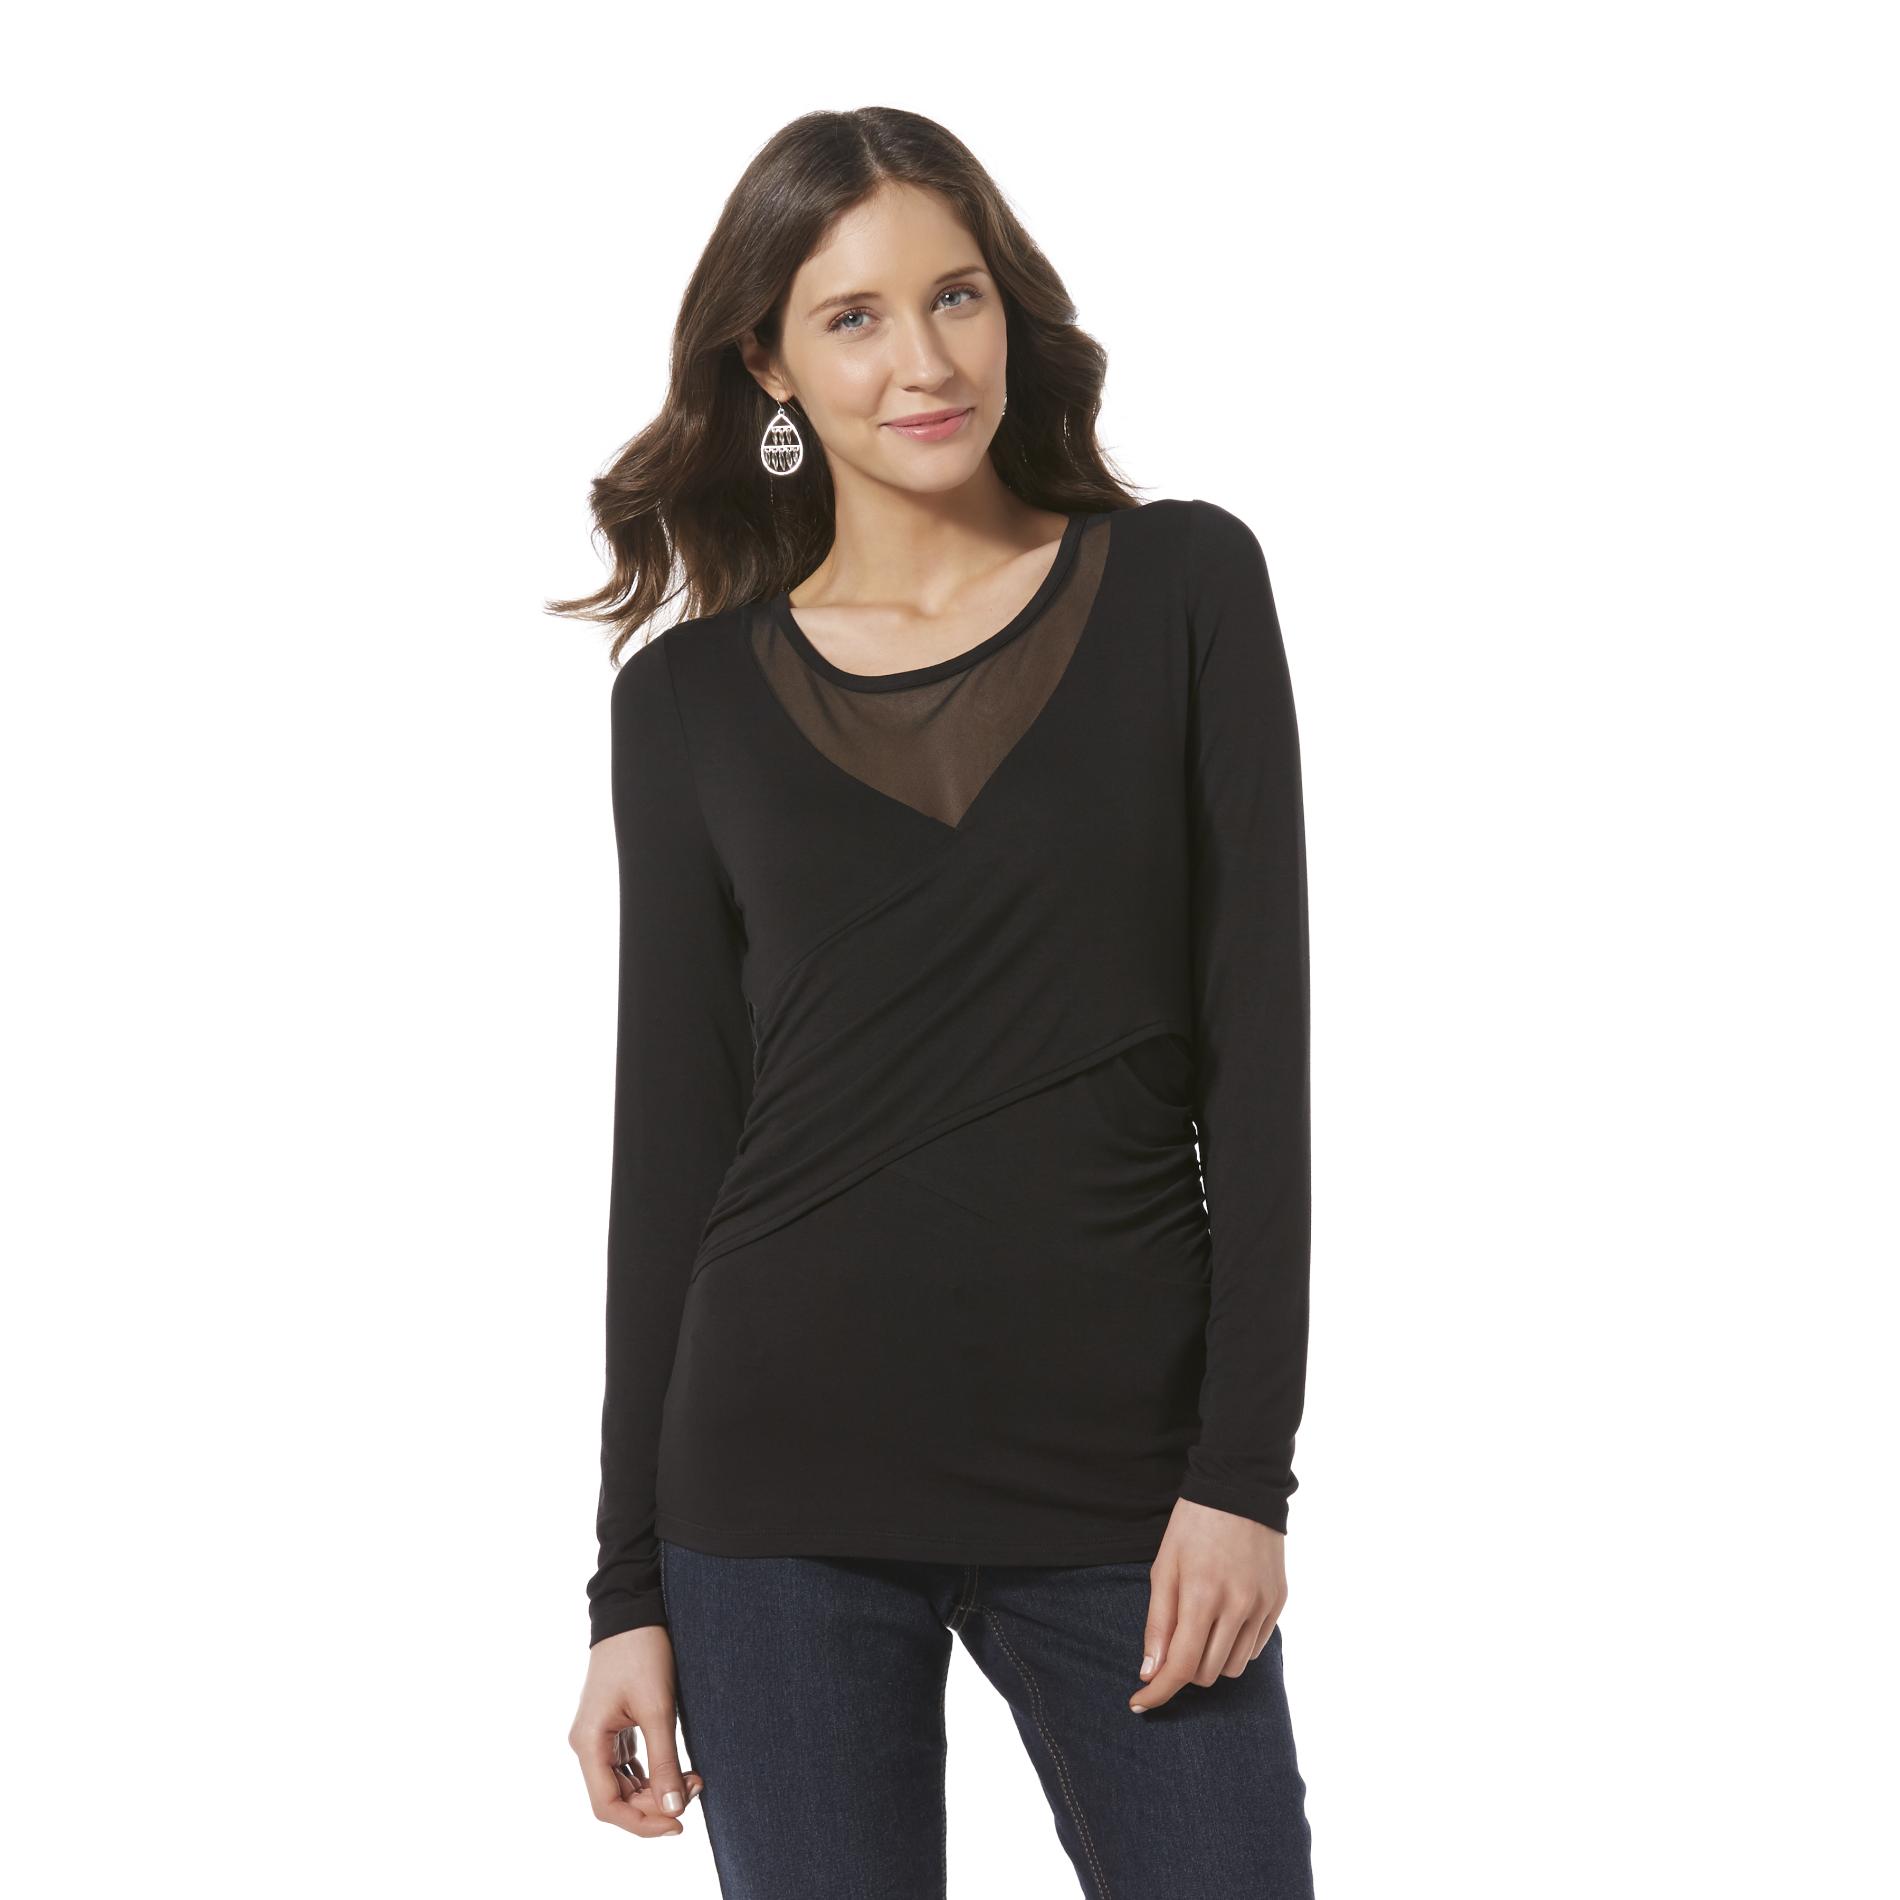 Attention Women's Knit Envelope Top